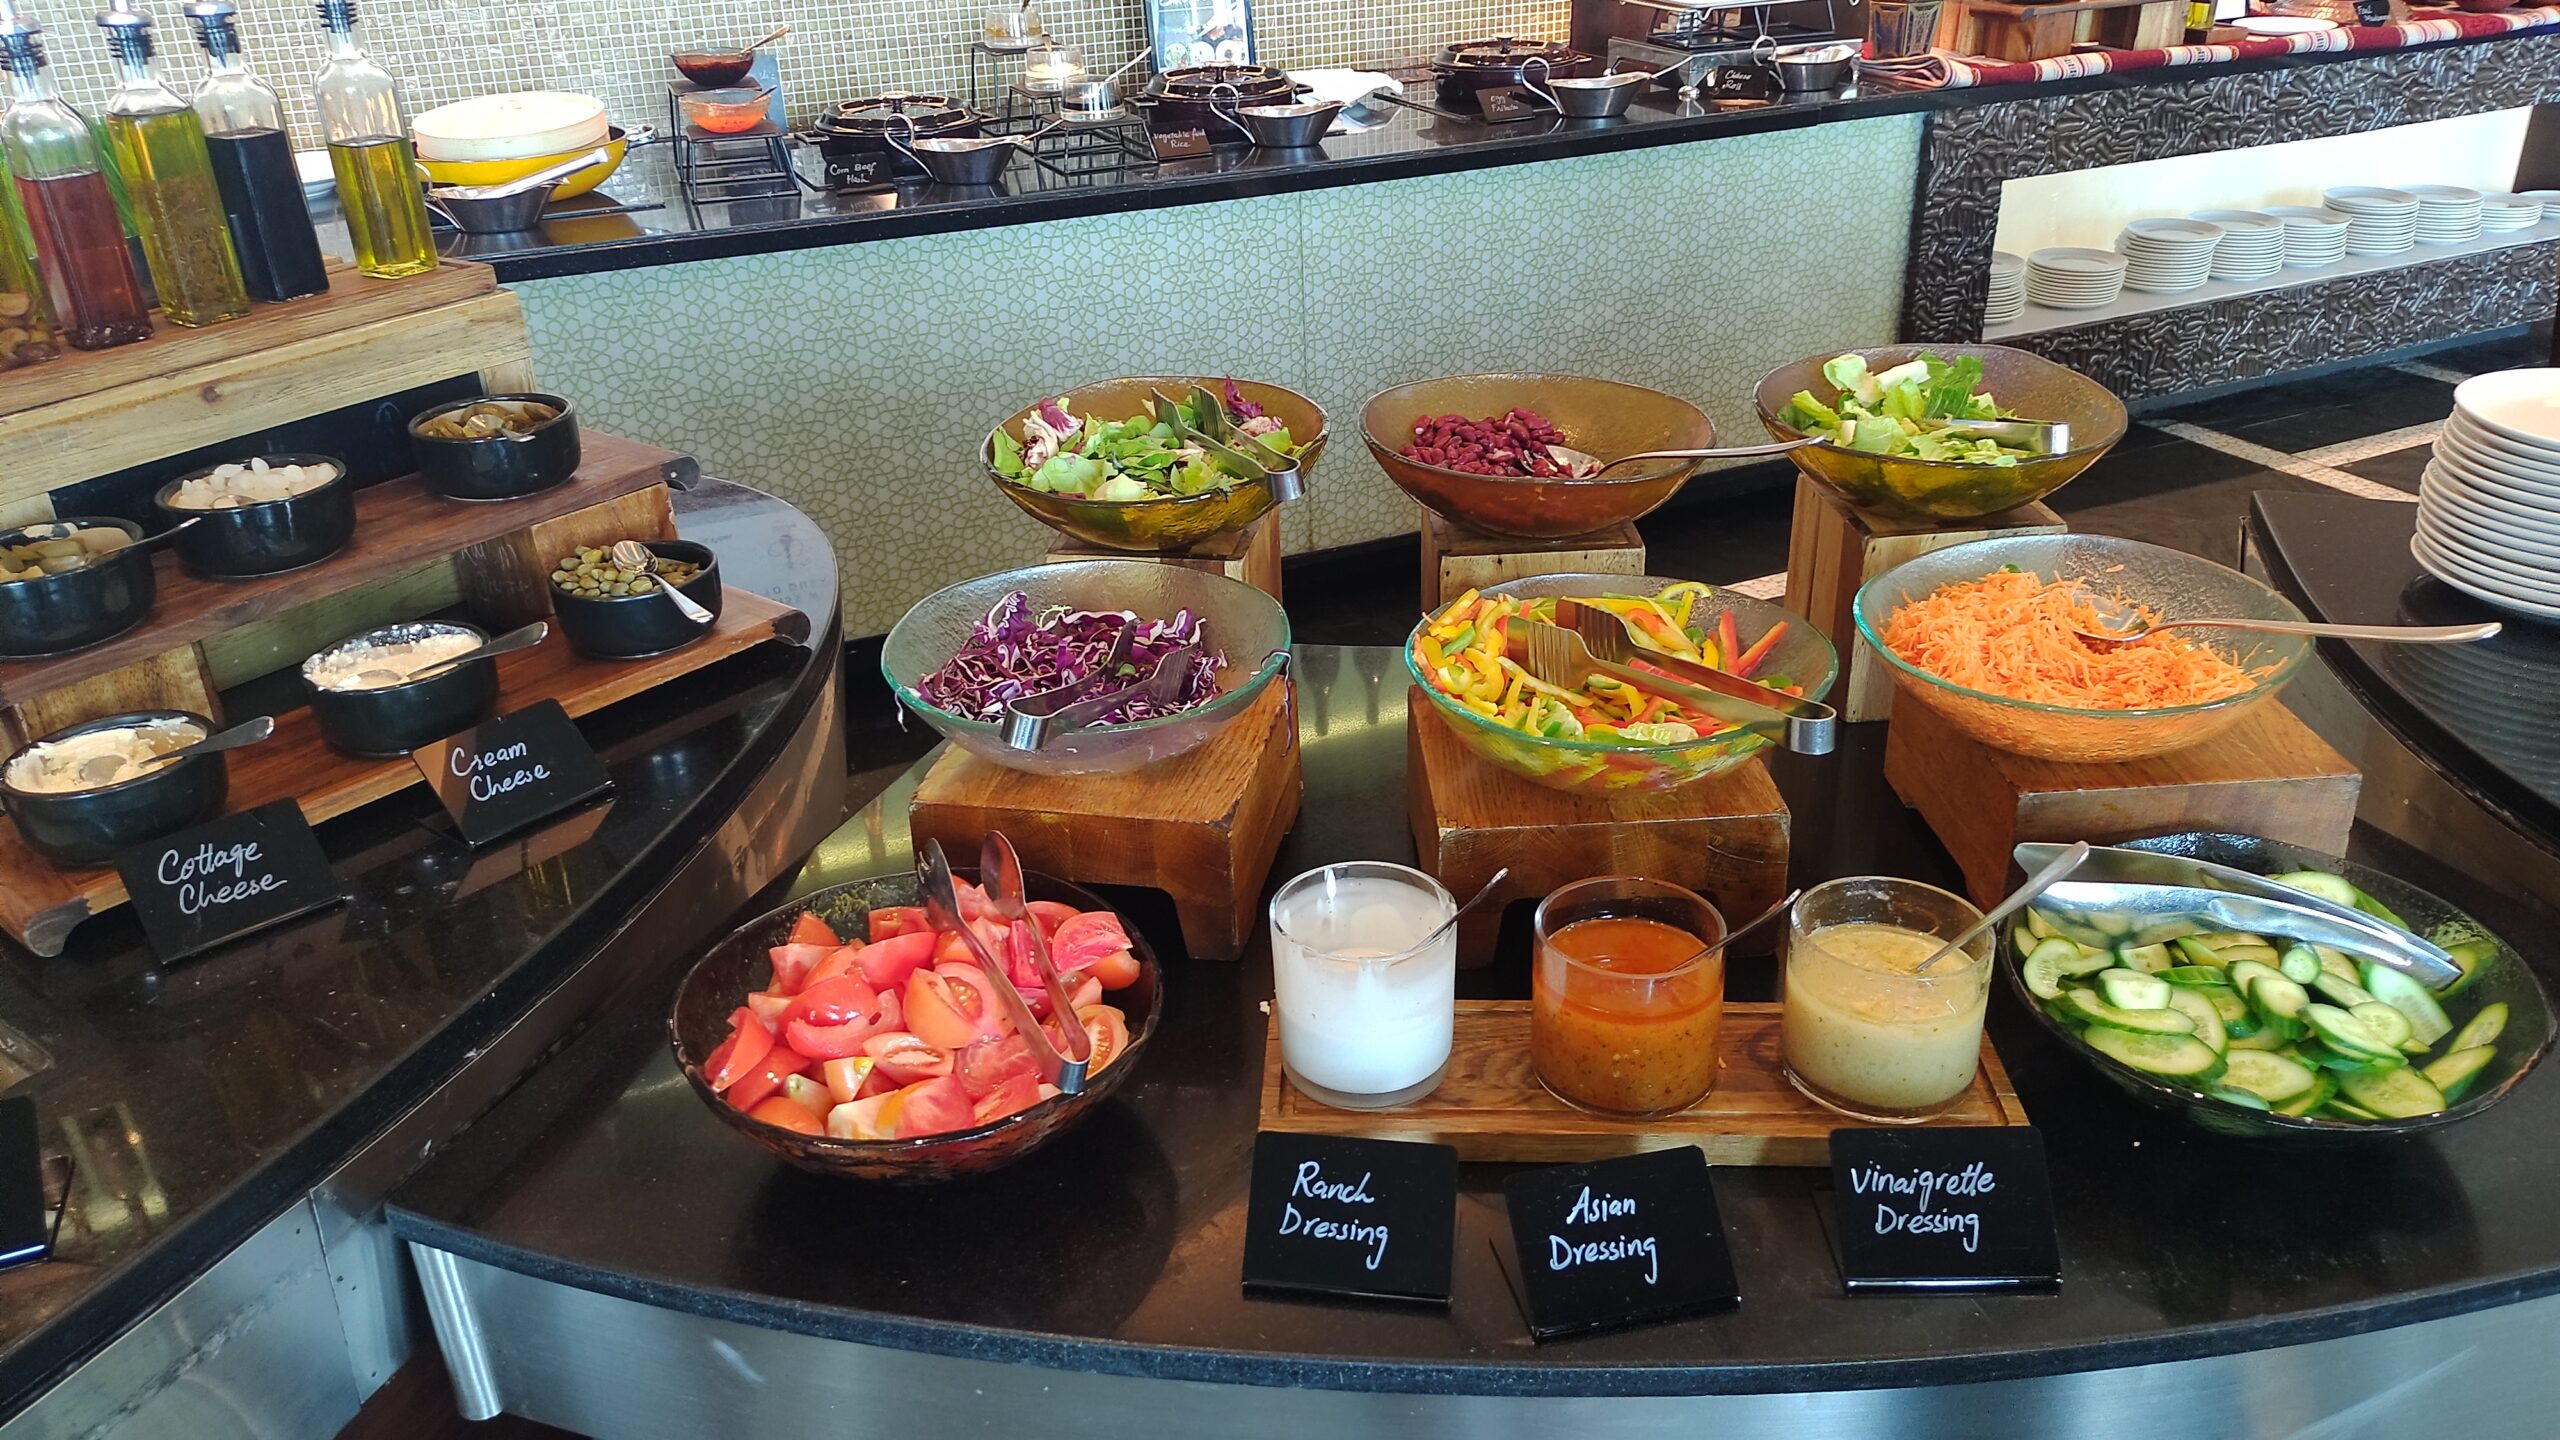 PICTURE OF THE SALAD BAR STATION.